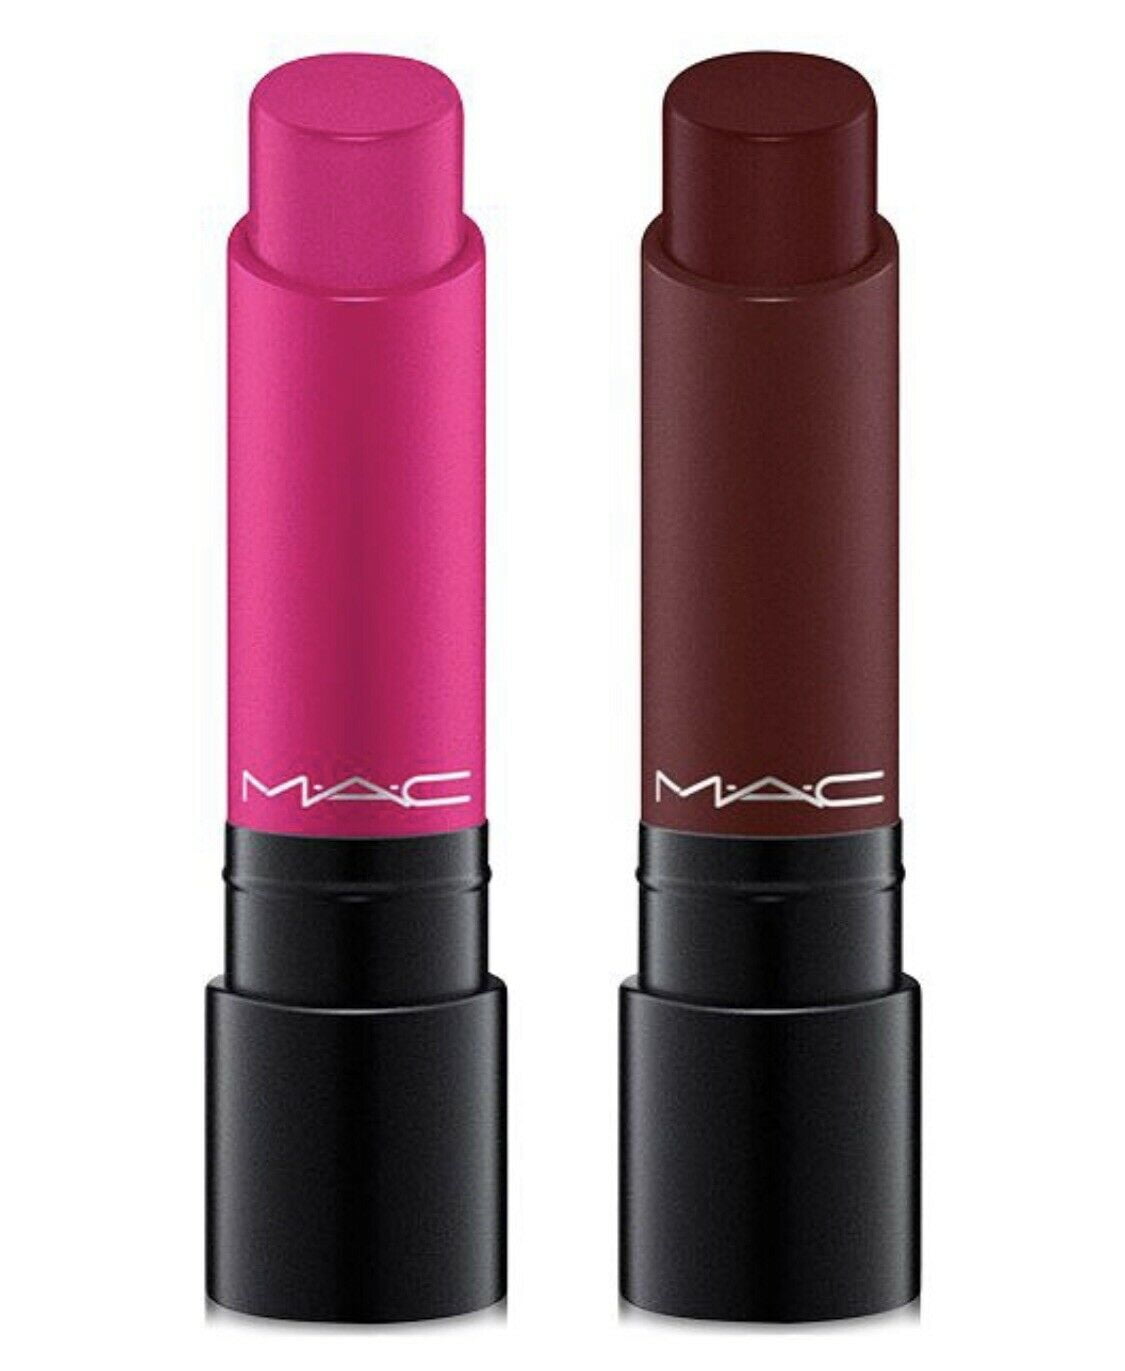 Meander Collectief buffet MAC 2 Piece Liptensity Lipstick Set, Created for Macy's 0.12oz Each New In  Box - Walmart.com